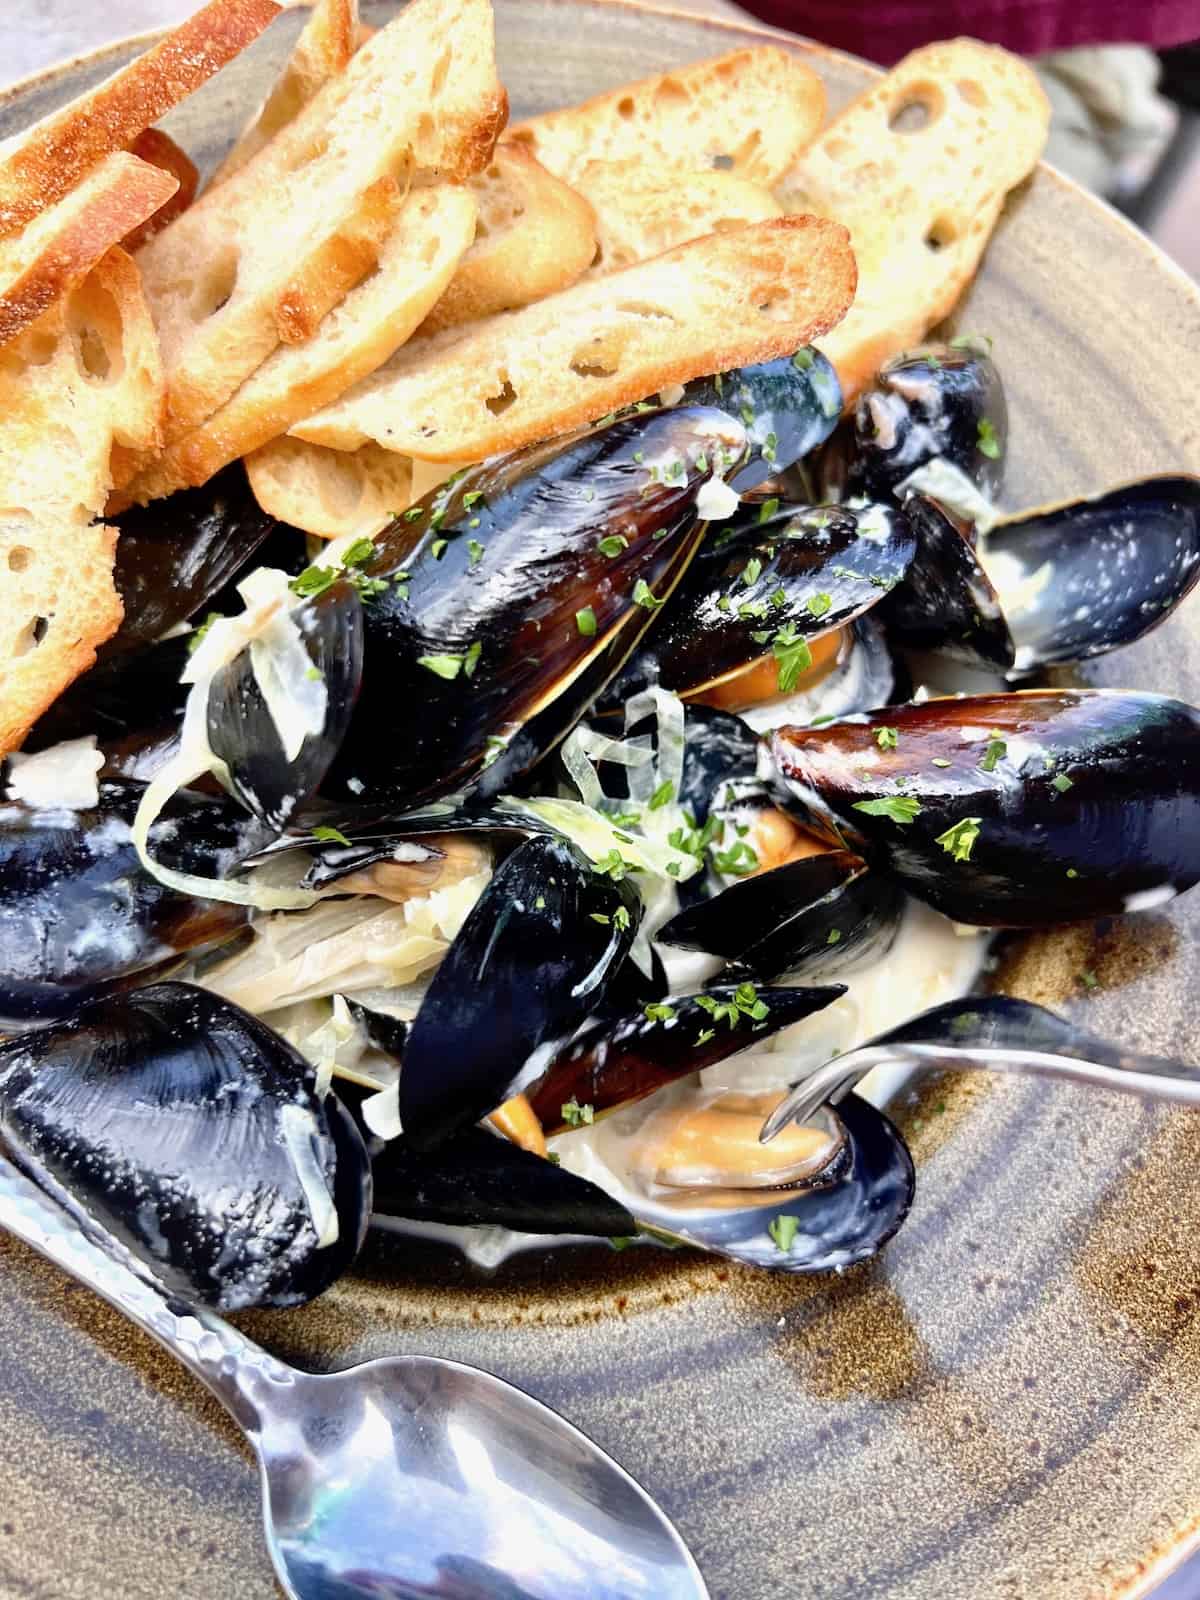 Mussels & crostini in a bowl served at a fine restaurant on San Juan Island.